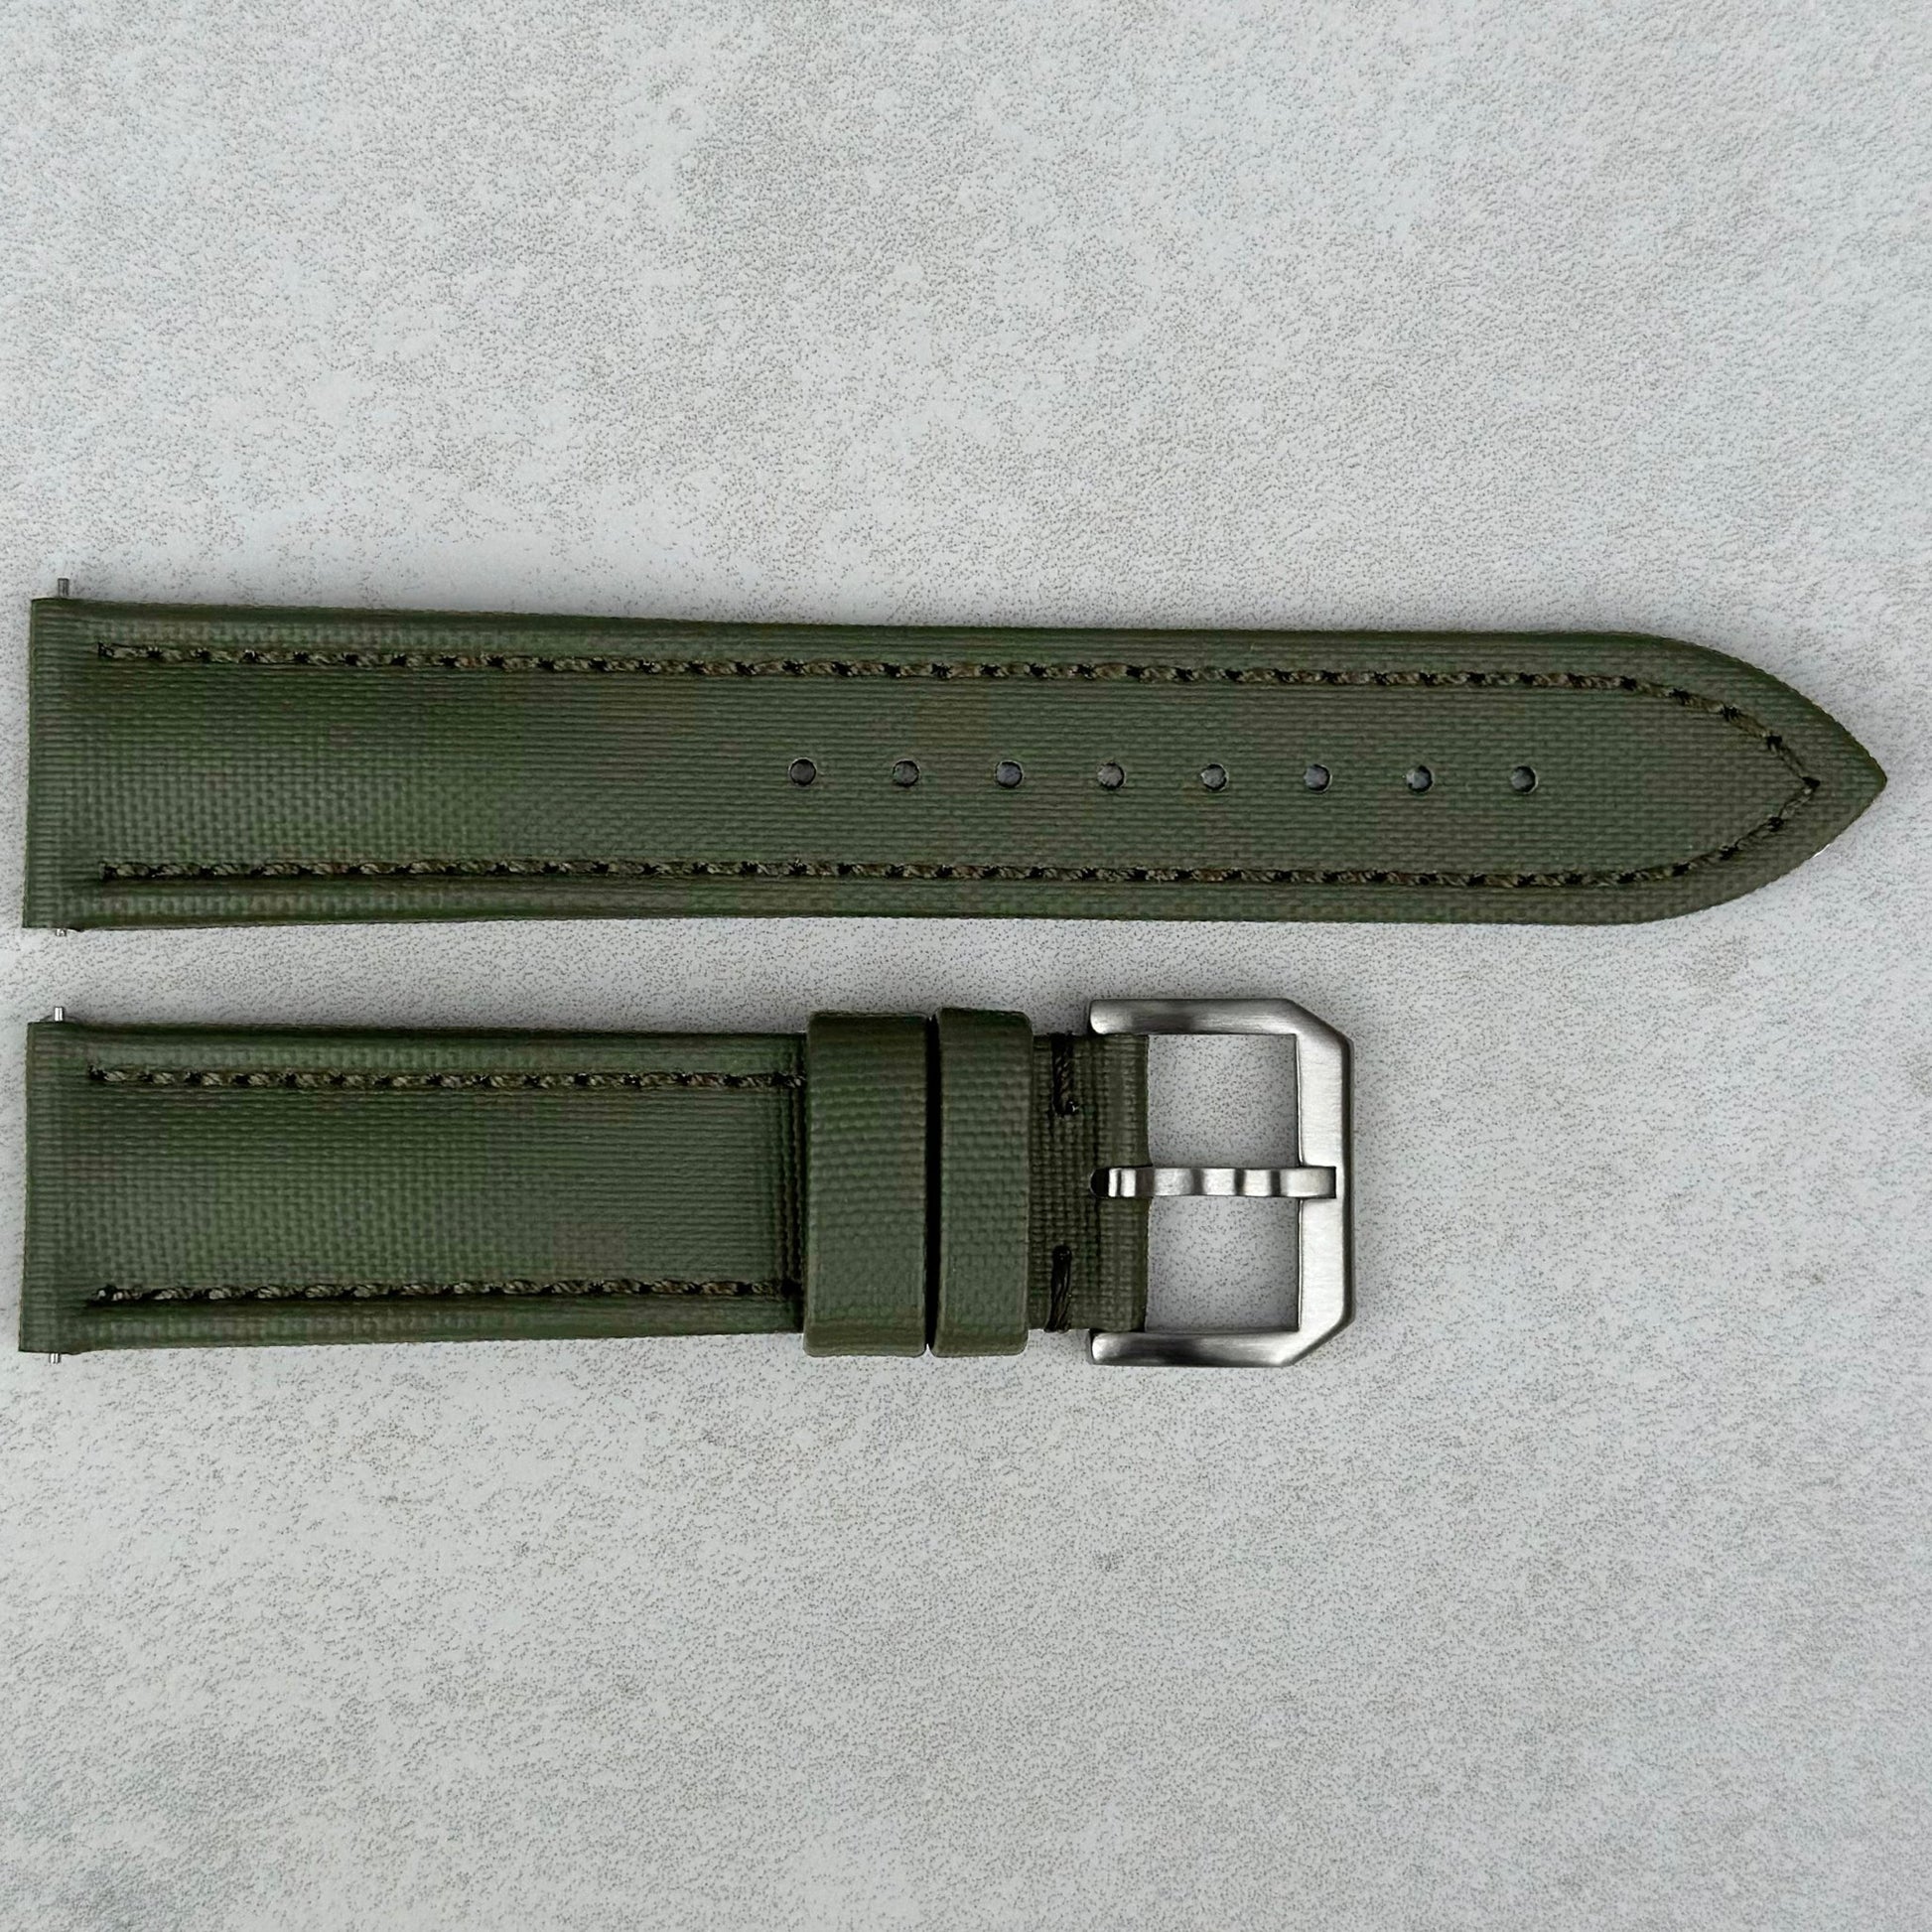 Bermuda khaki green sail cloth watch strap. 20mm, 22mm. 316L stainless steel buckle. Watch And Strap.